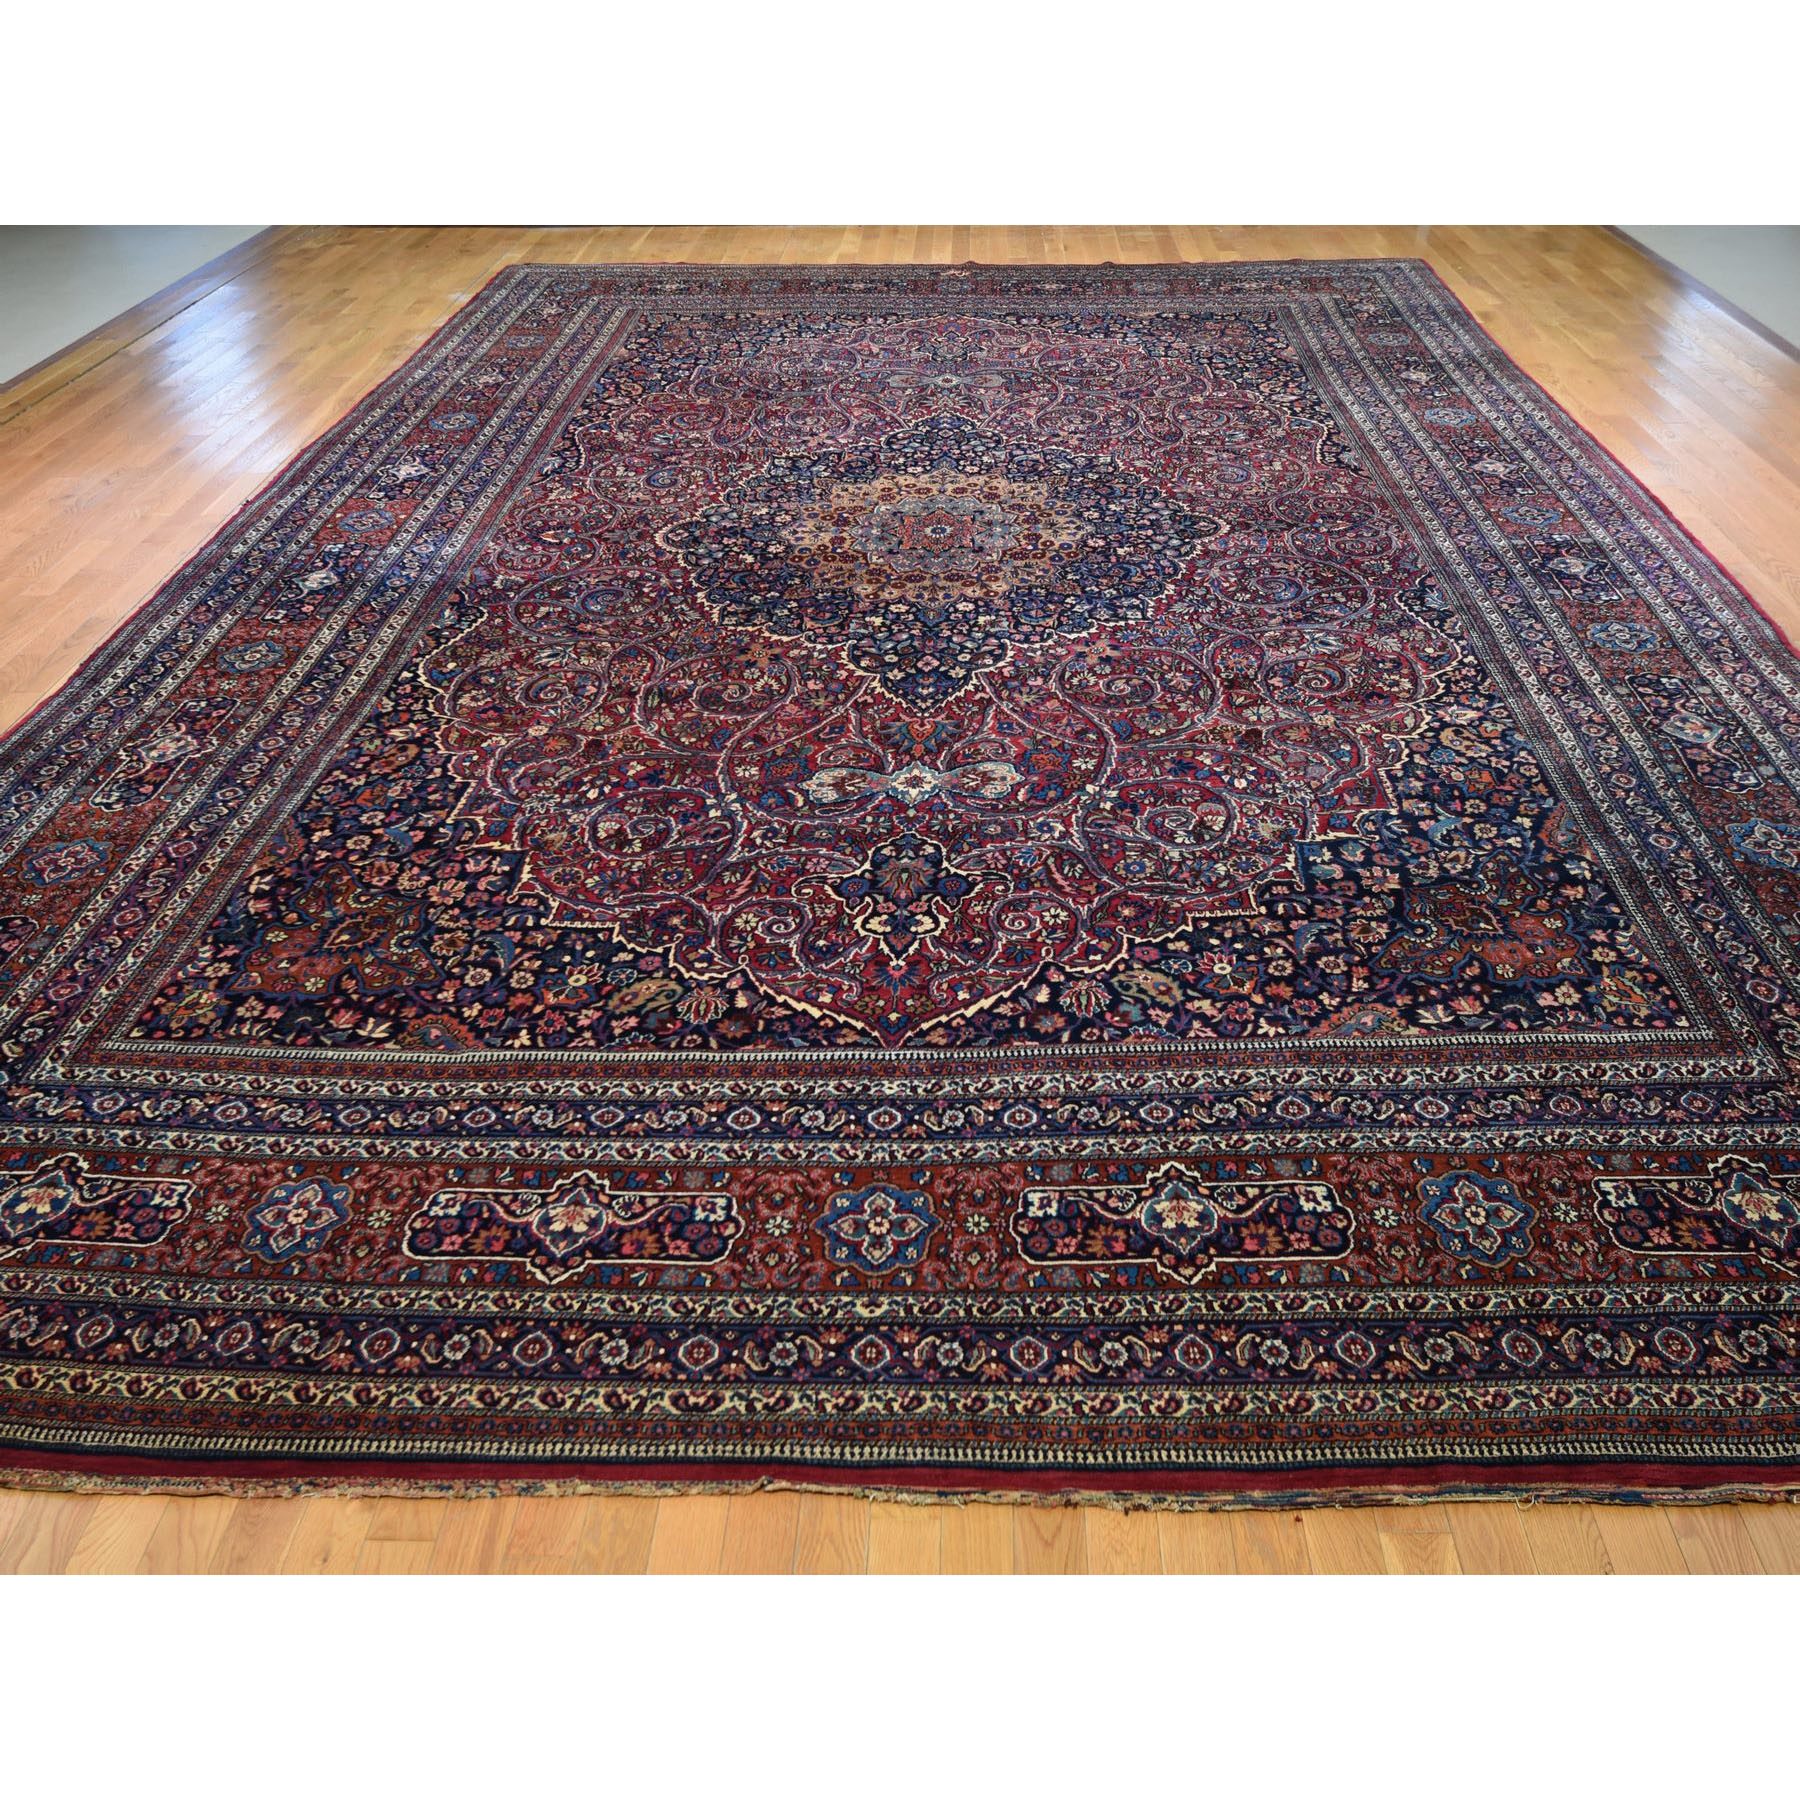 13-x19-2  Oversized Antique Persian Mashad Signed Full Pile And Soft Hand Knotted Oriental Rug 